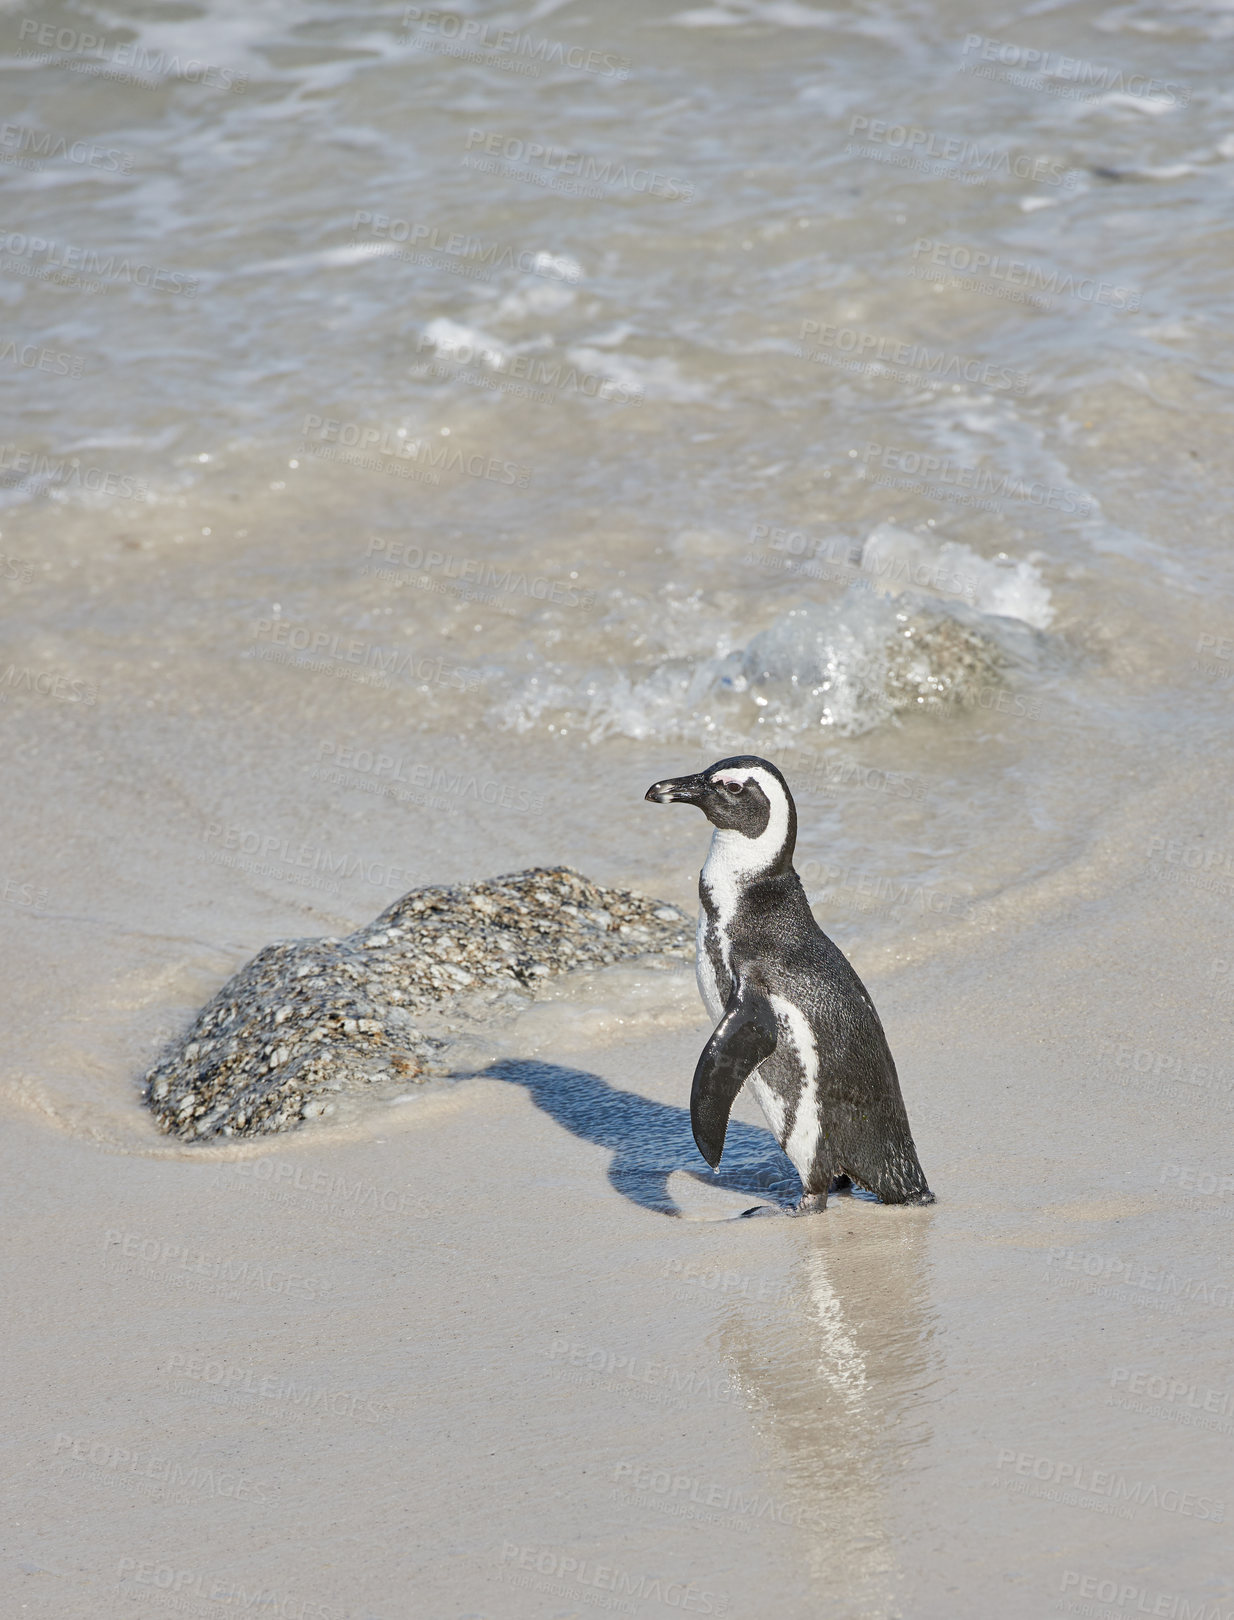 Buy stock photo A penguin standing in shallow sea water. One flightless bird on a beach in its natural habitat. An endangered black footed or Cape penguin species at a sandy Boulders Beach in Cape Town, South Africa